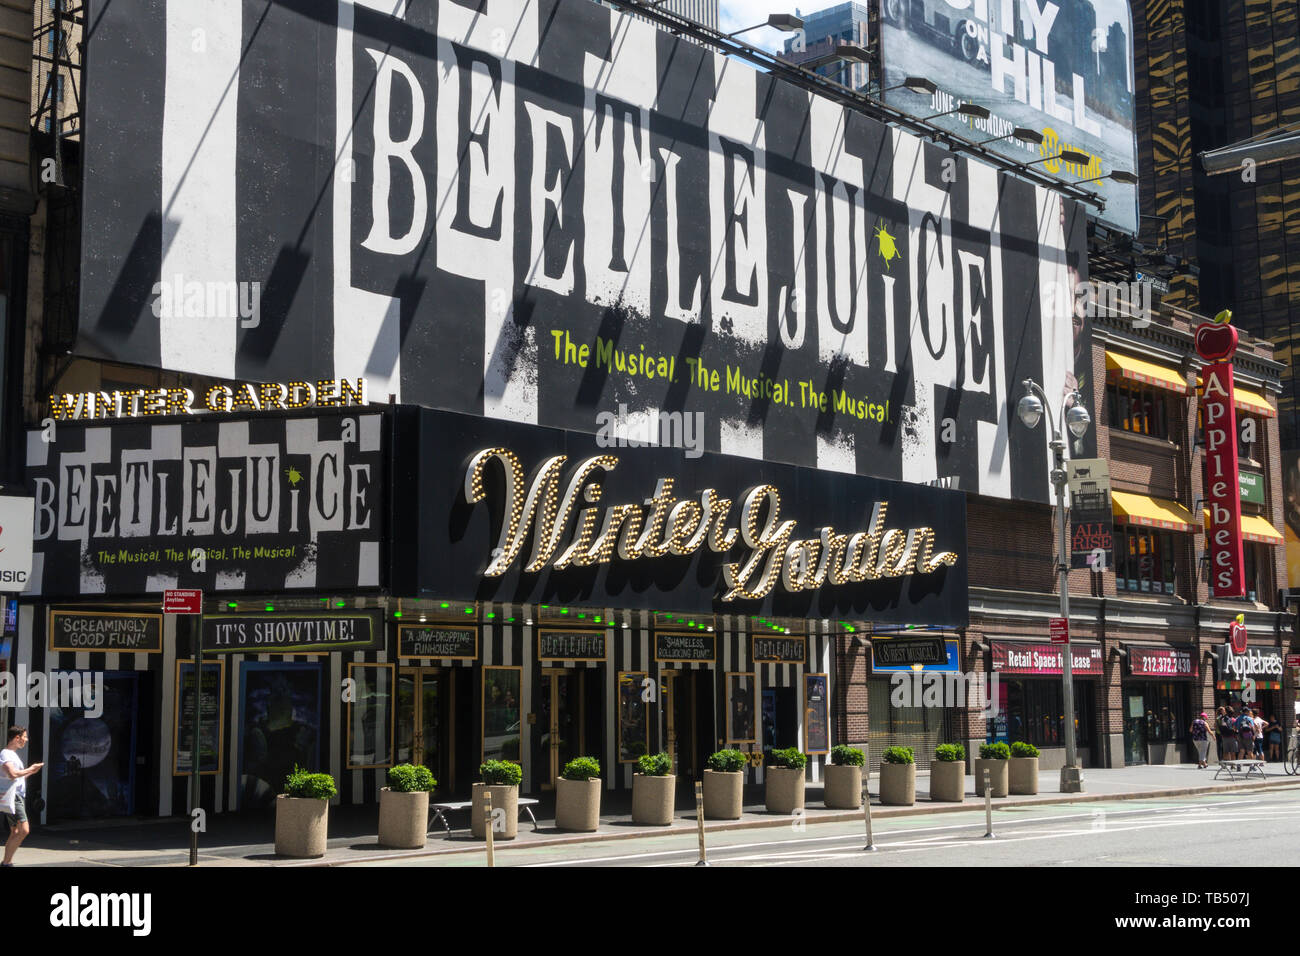 'Beetlejuice' Marquee at the Winter Garden Theatre on Broadway, New York City, USA Stock Photo